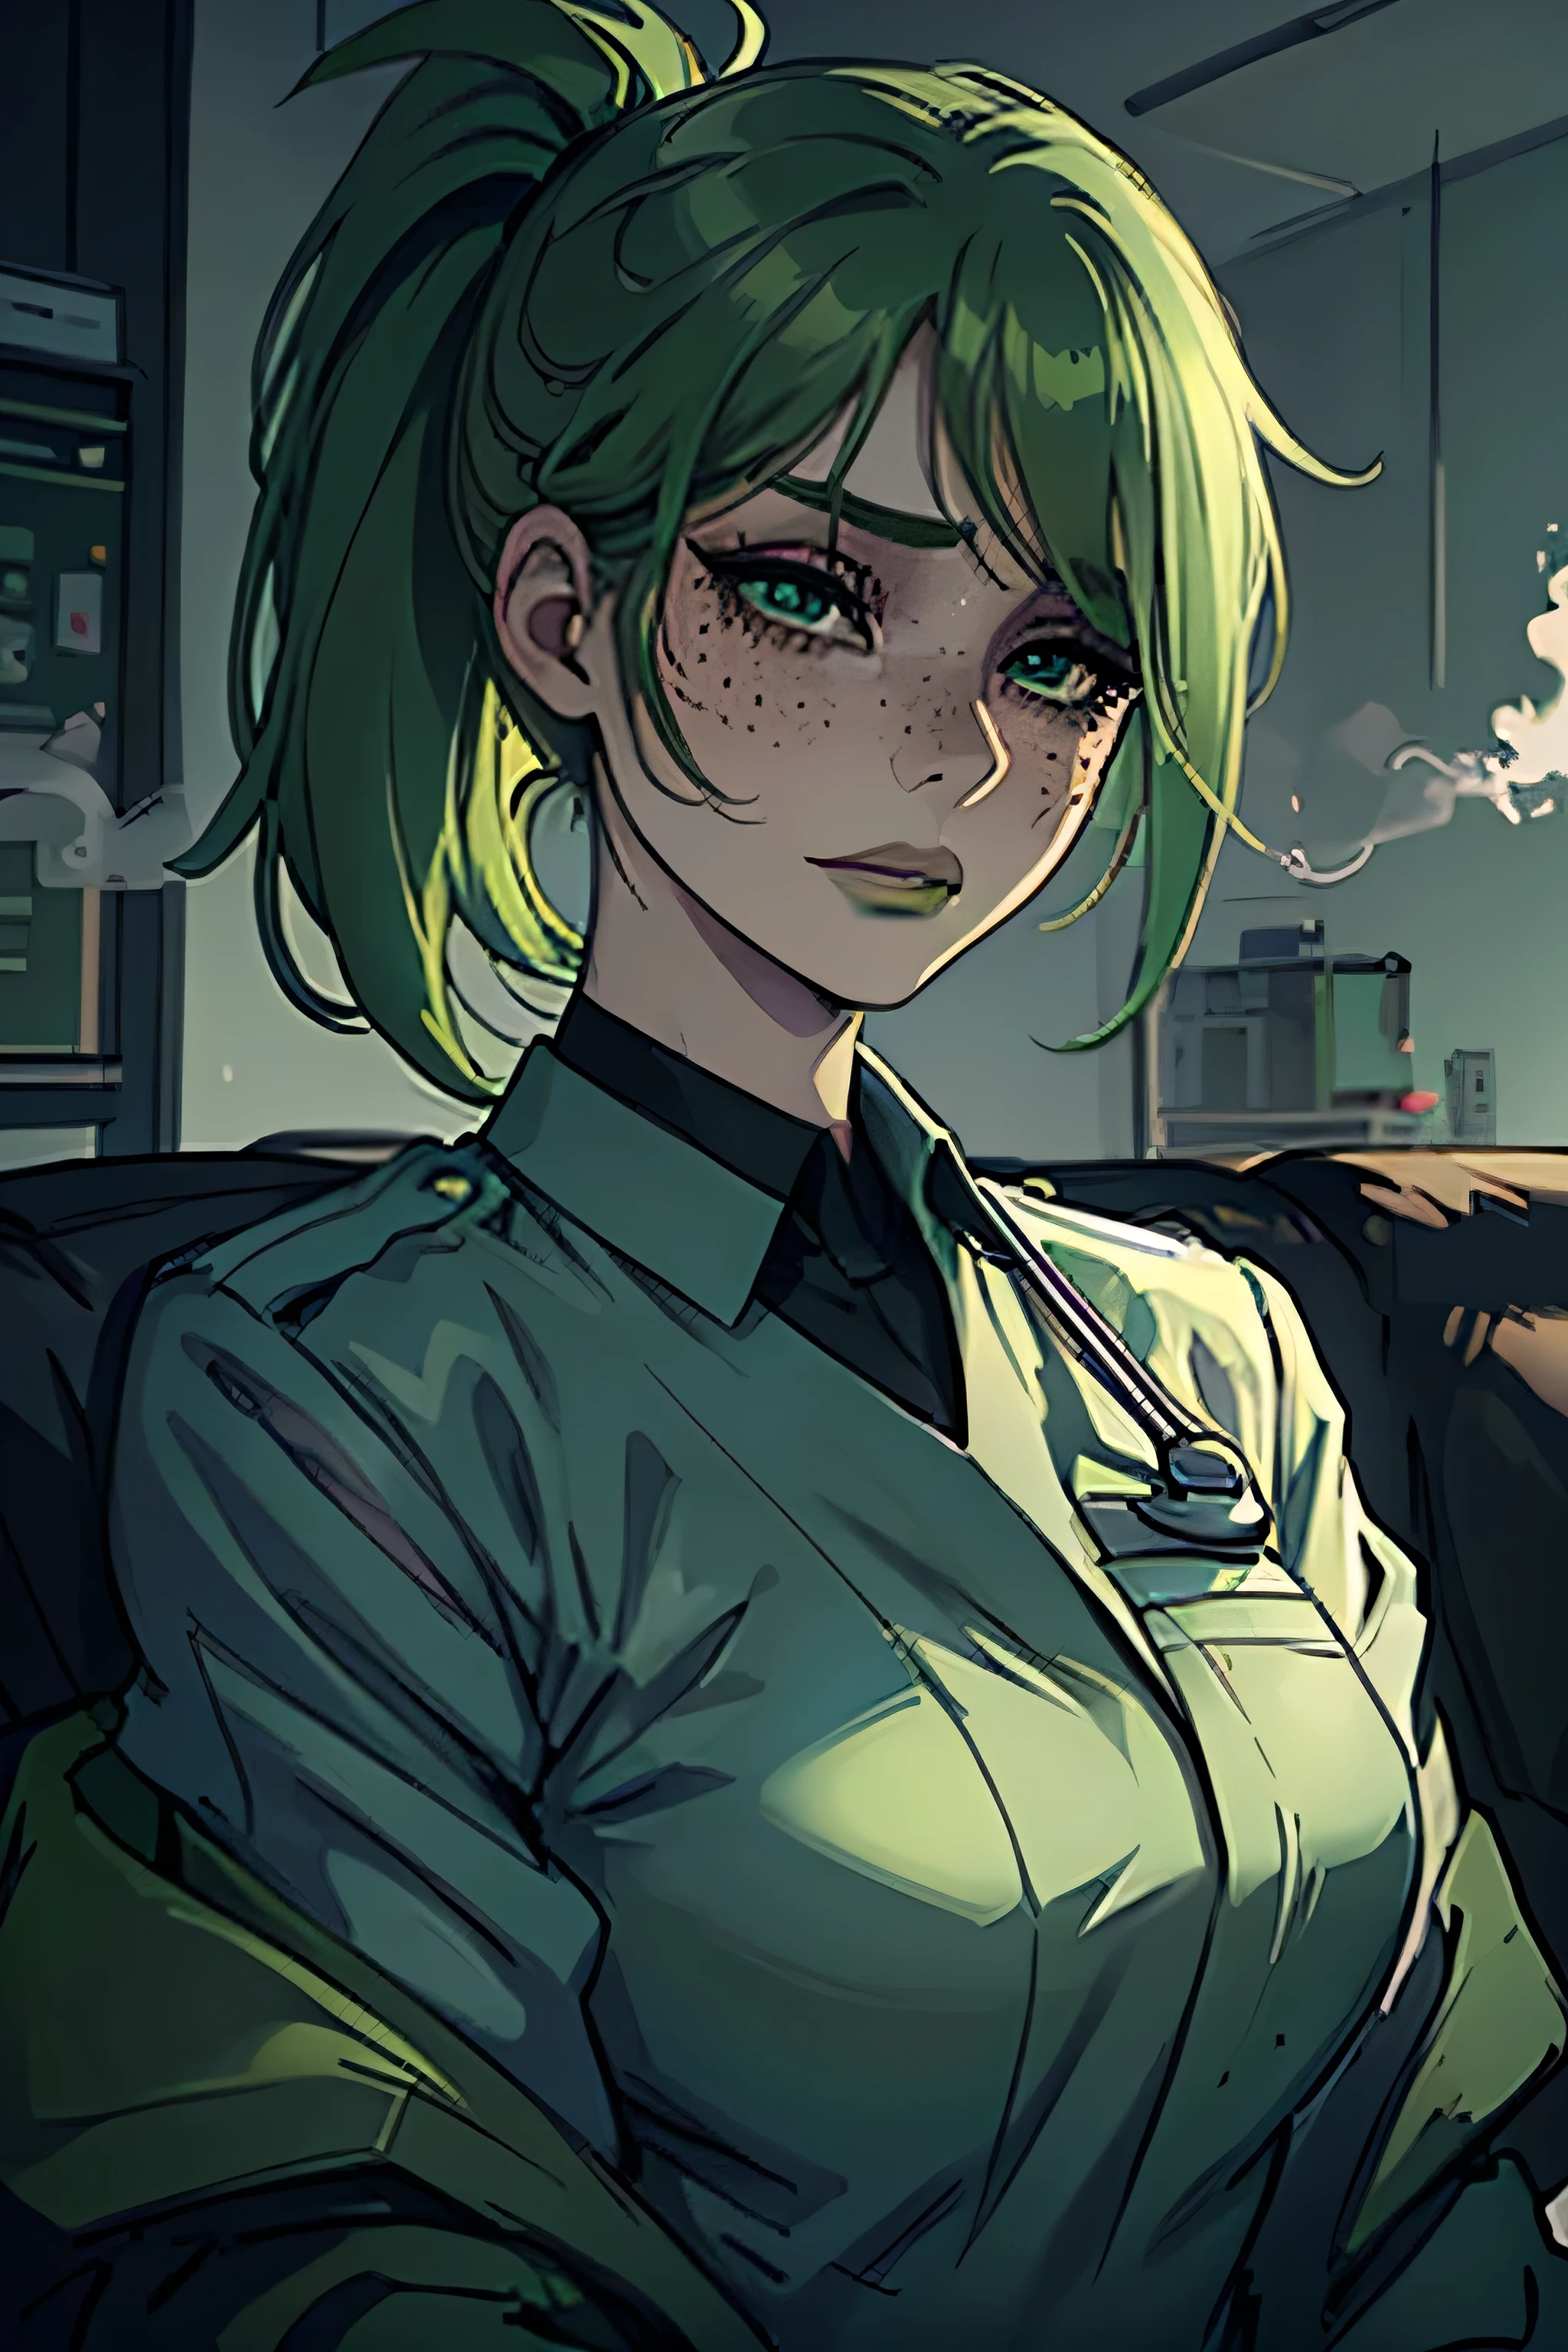 Masterpiece, best quality, centered in frame, portrait, female, pale skin, stressed expression, busty, exhaling smoke, eye bags, stethoscope around neck, nervous, green lips, messy ponytail, bright green hair, couch landscape, green eyes, paramedic uniform, freckles, beautiful